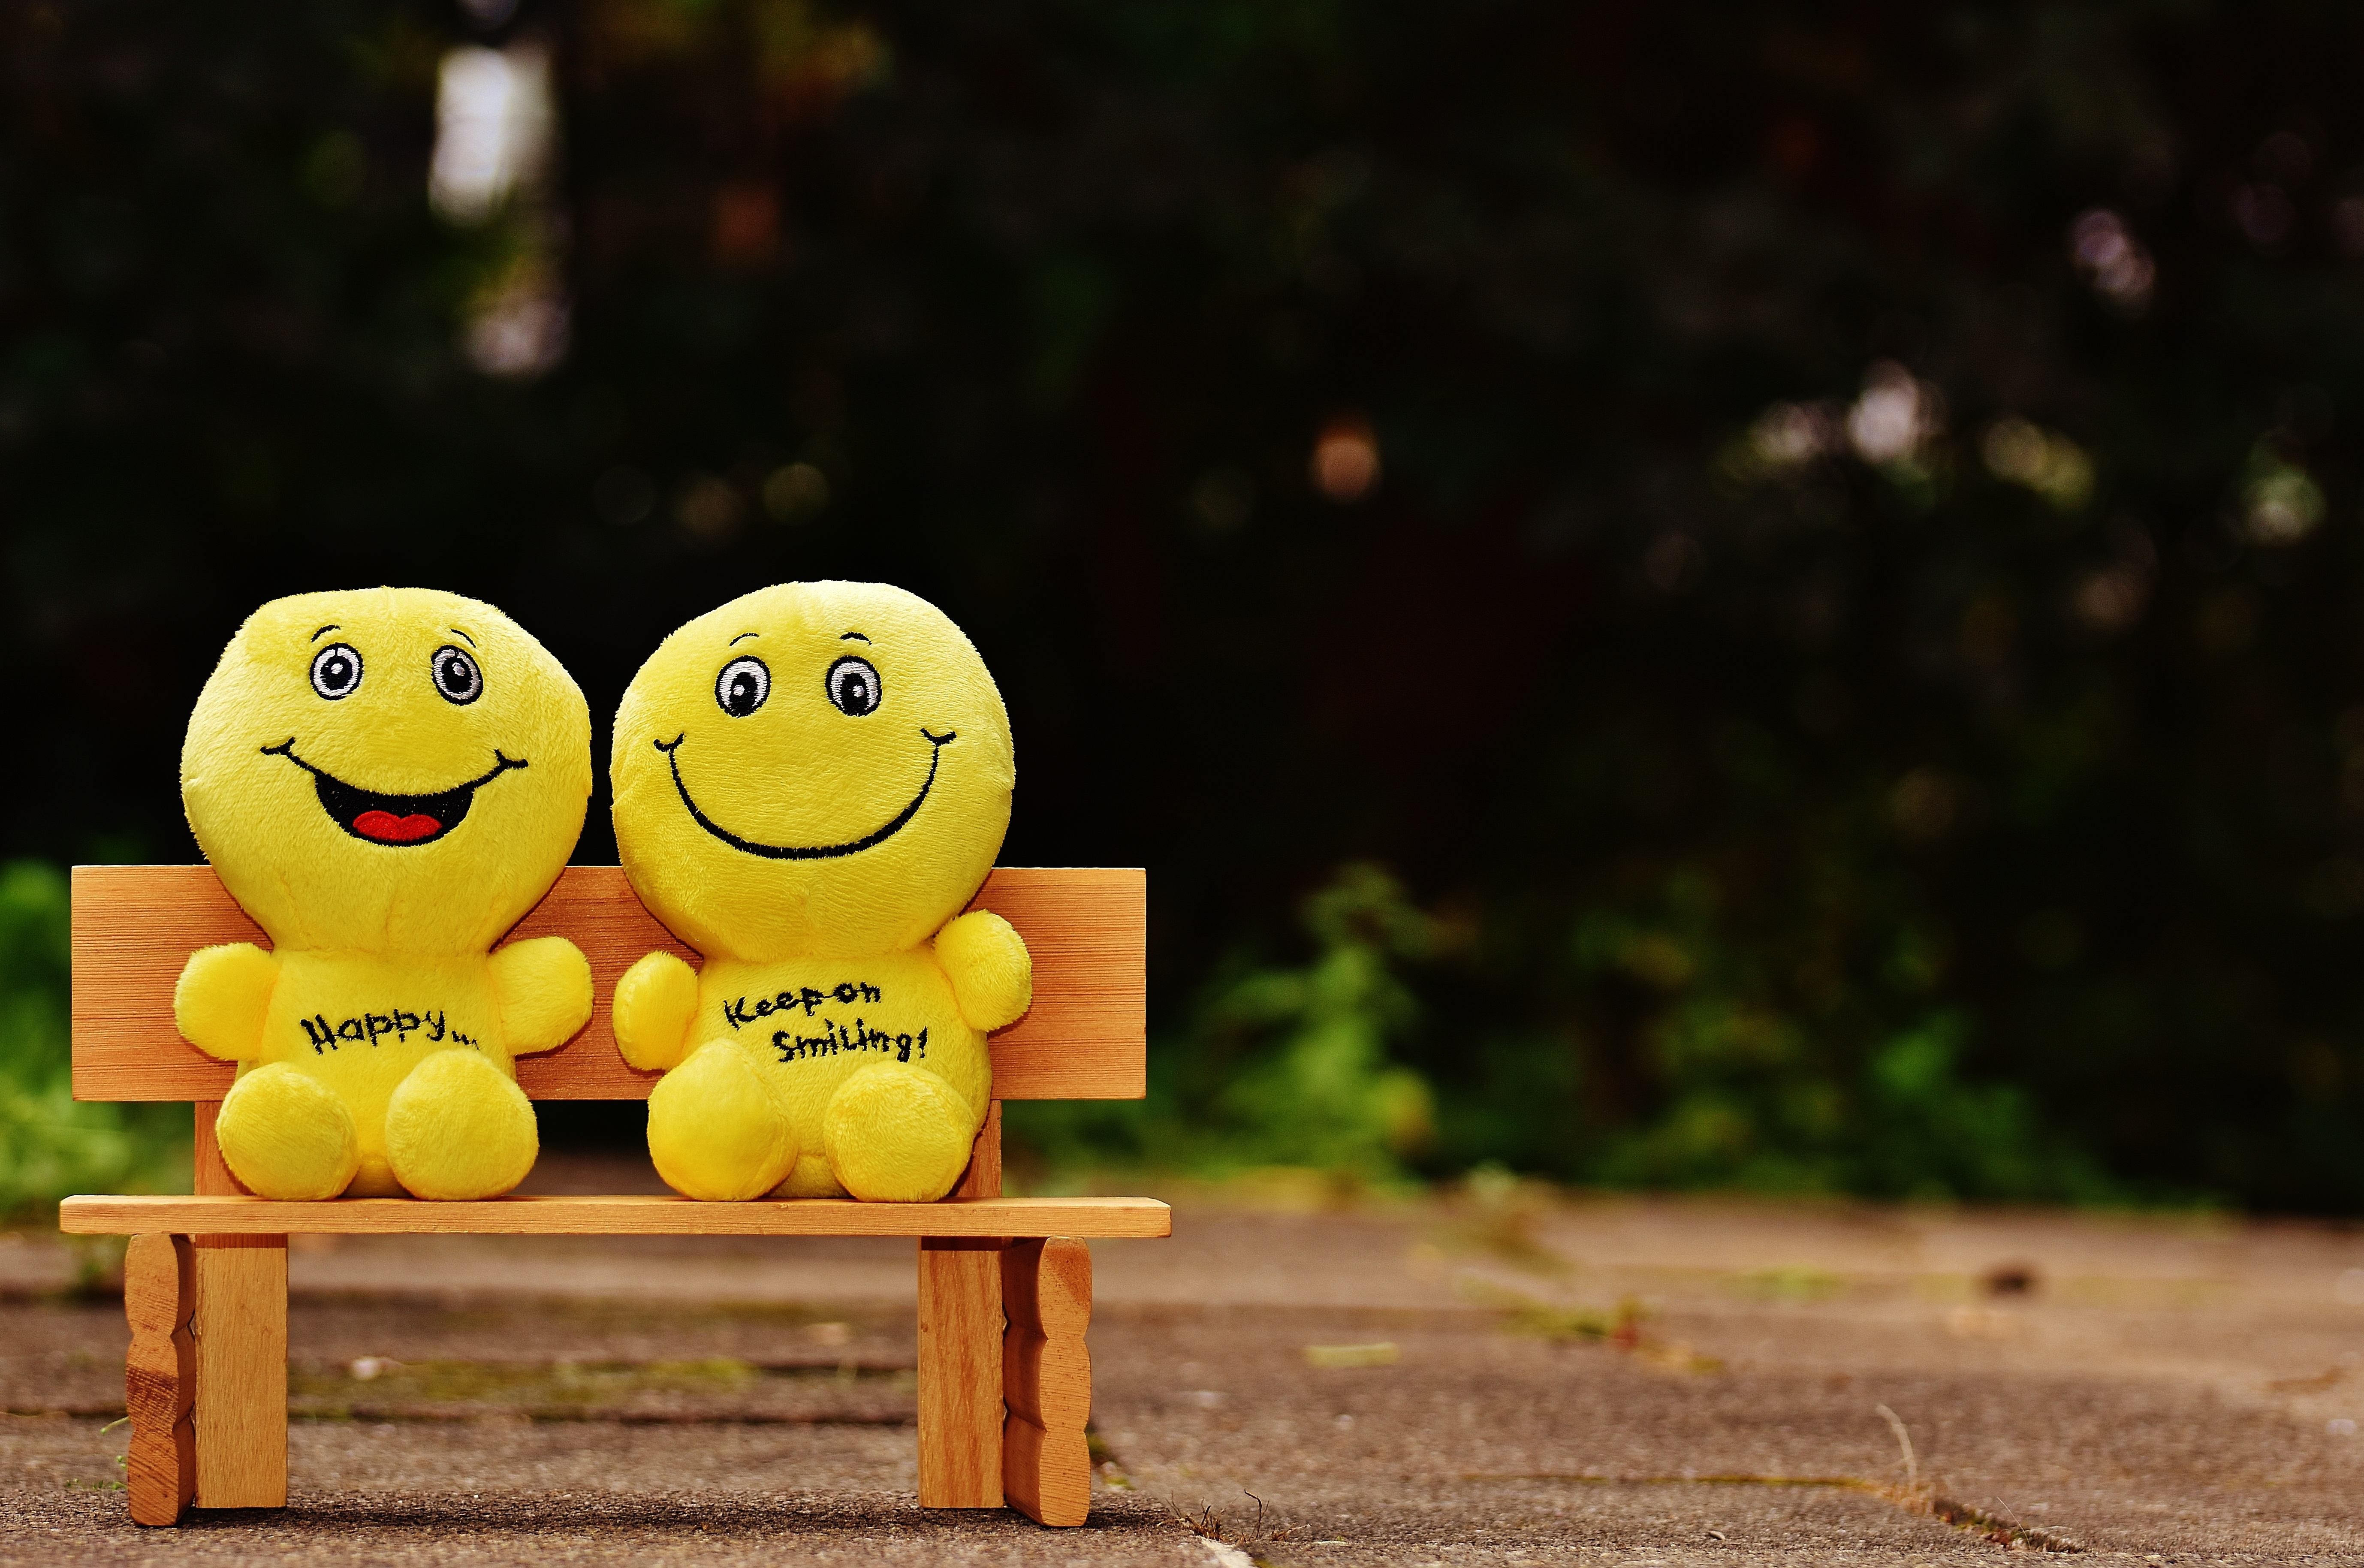 Smiley Marbles | Smile wallpaper, Cute wallpapers, Happy wallpaper